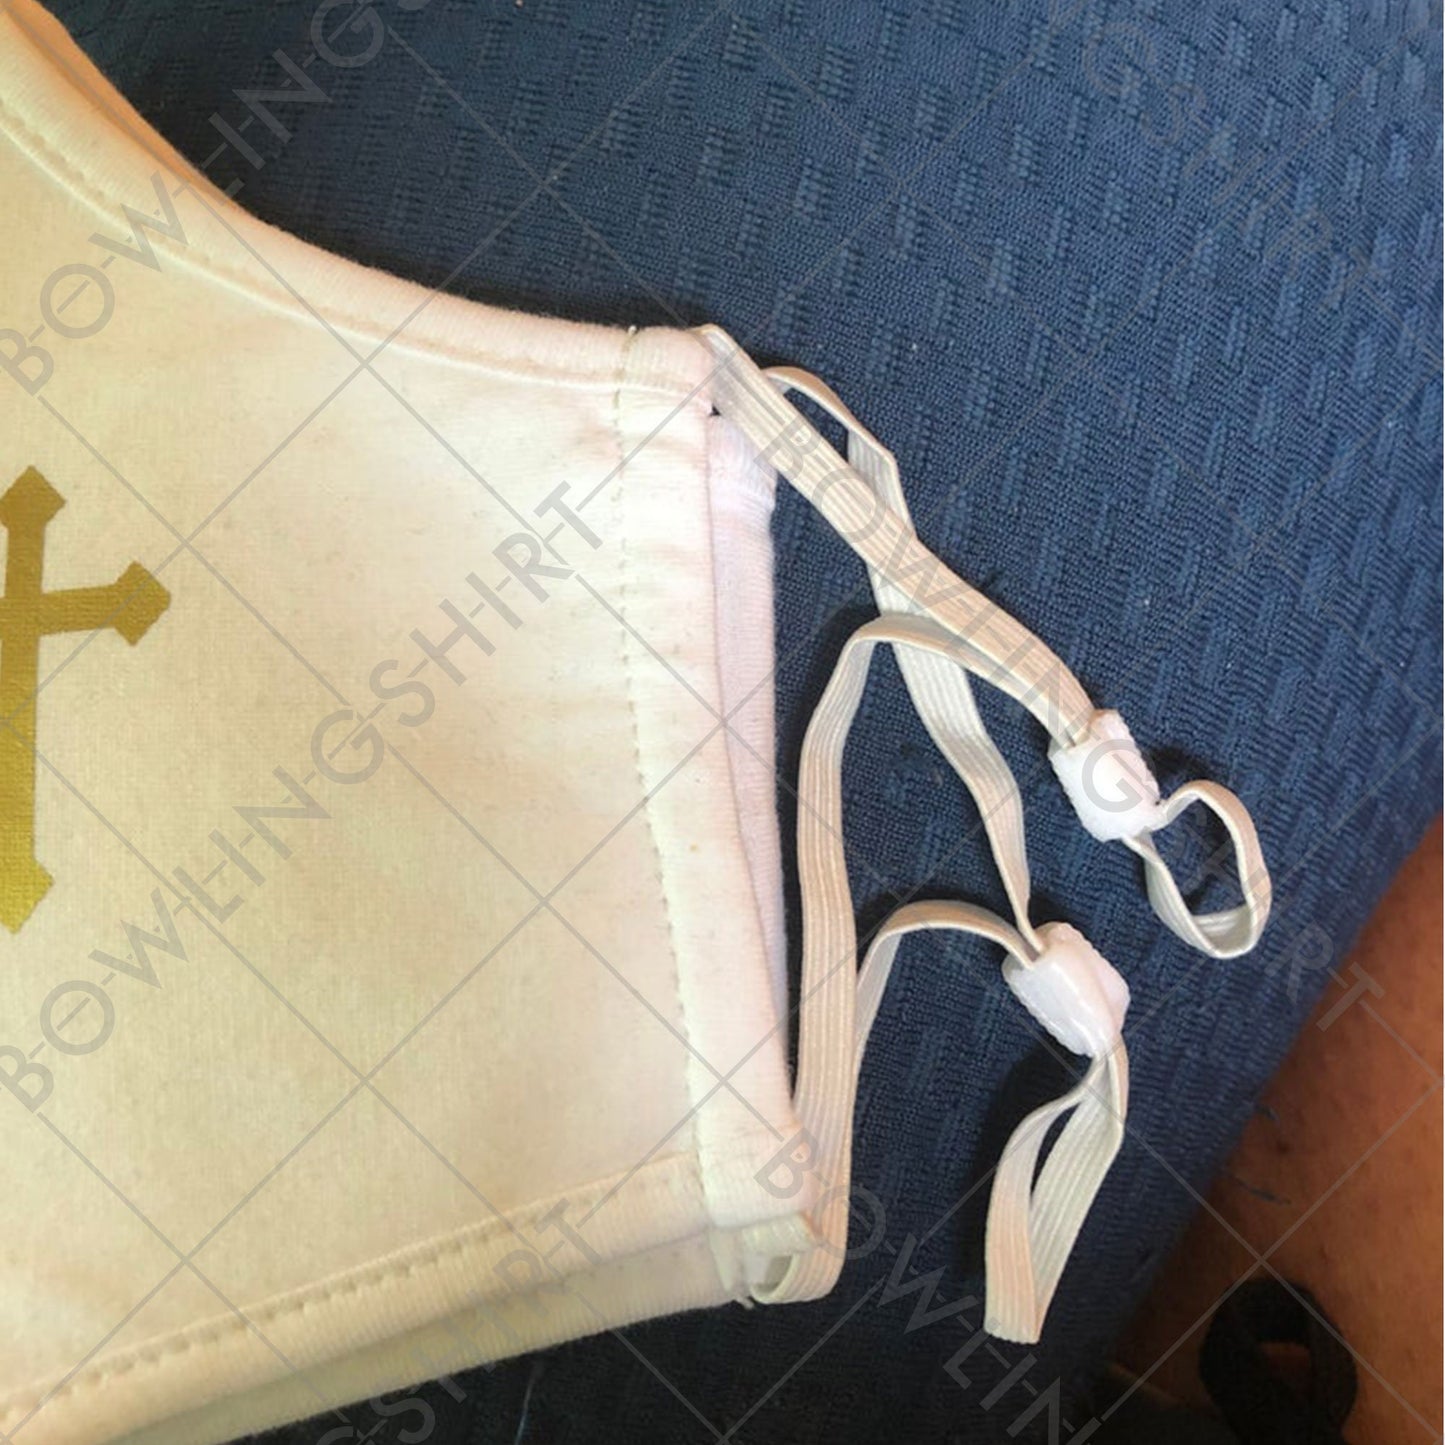 Wear your mask!! White and gold Cross mask perfect for church. Adjusting ear ties #19